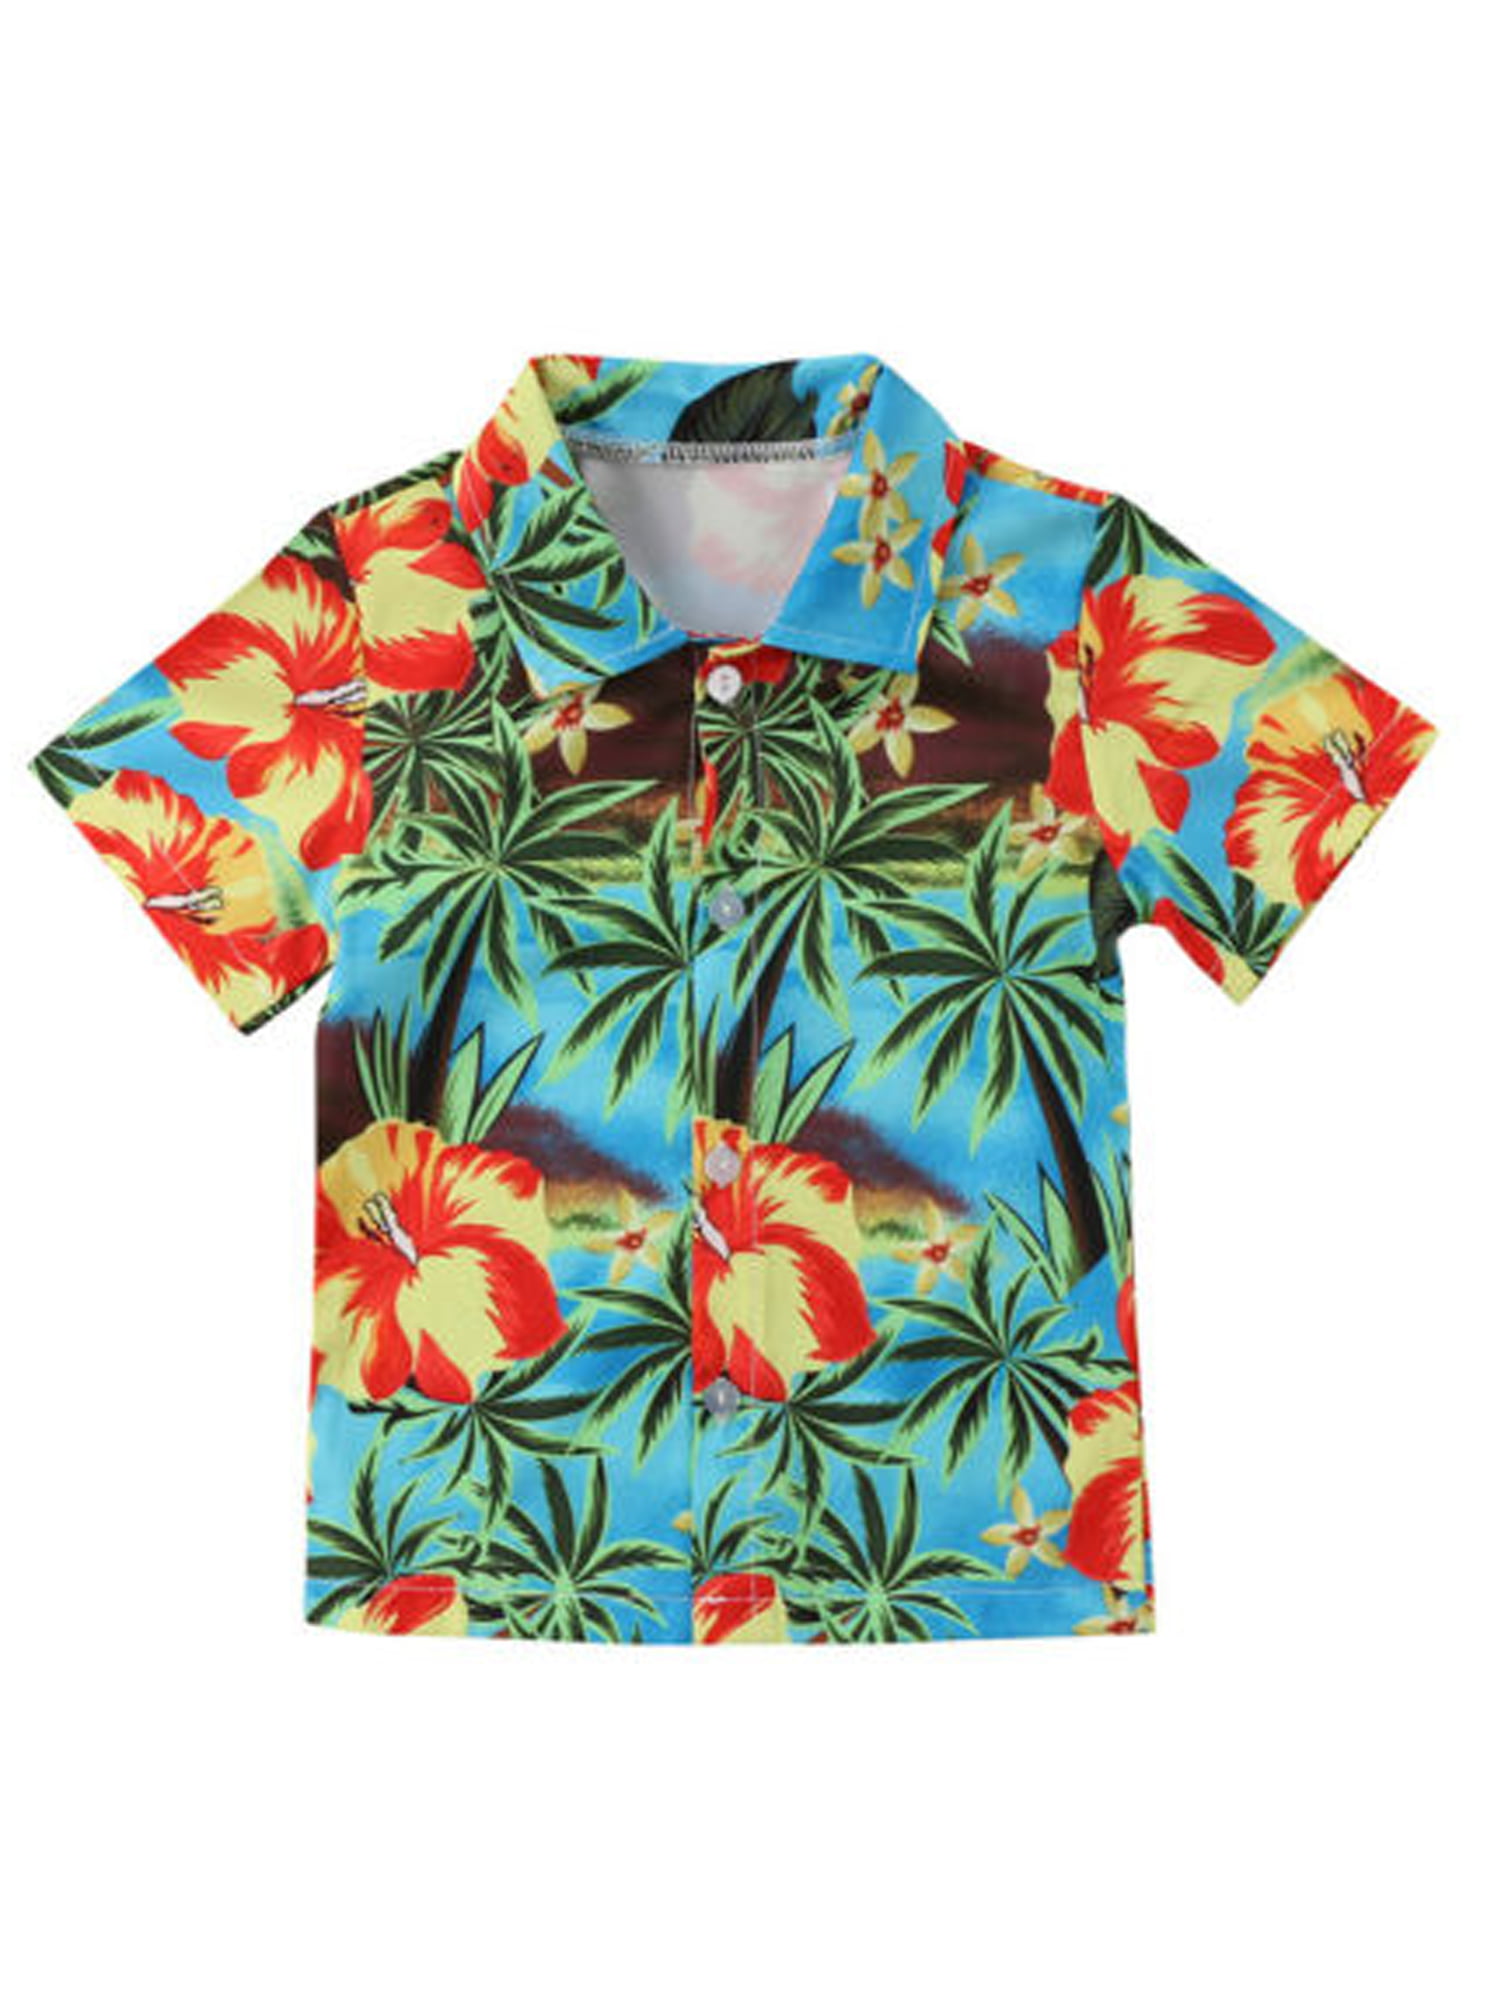 Tommelise Baby Boys Floral Cotton Casual Button Down Short Sleeve Hawaiian Shirt